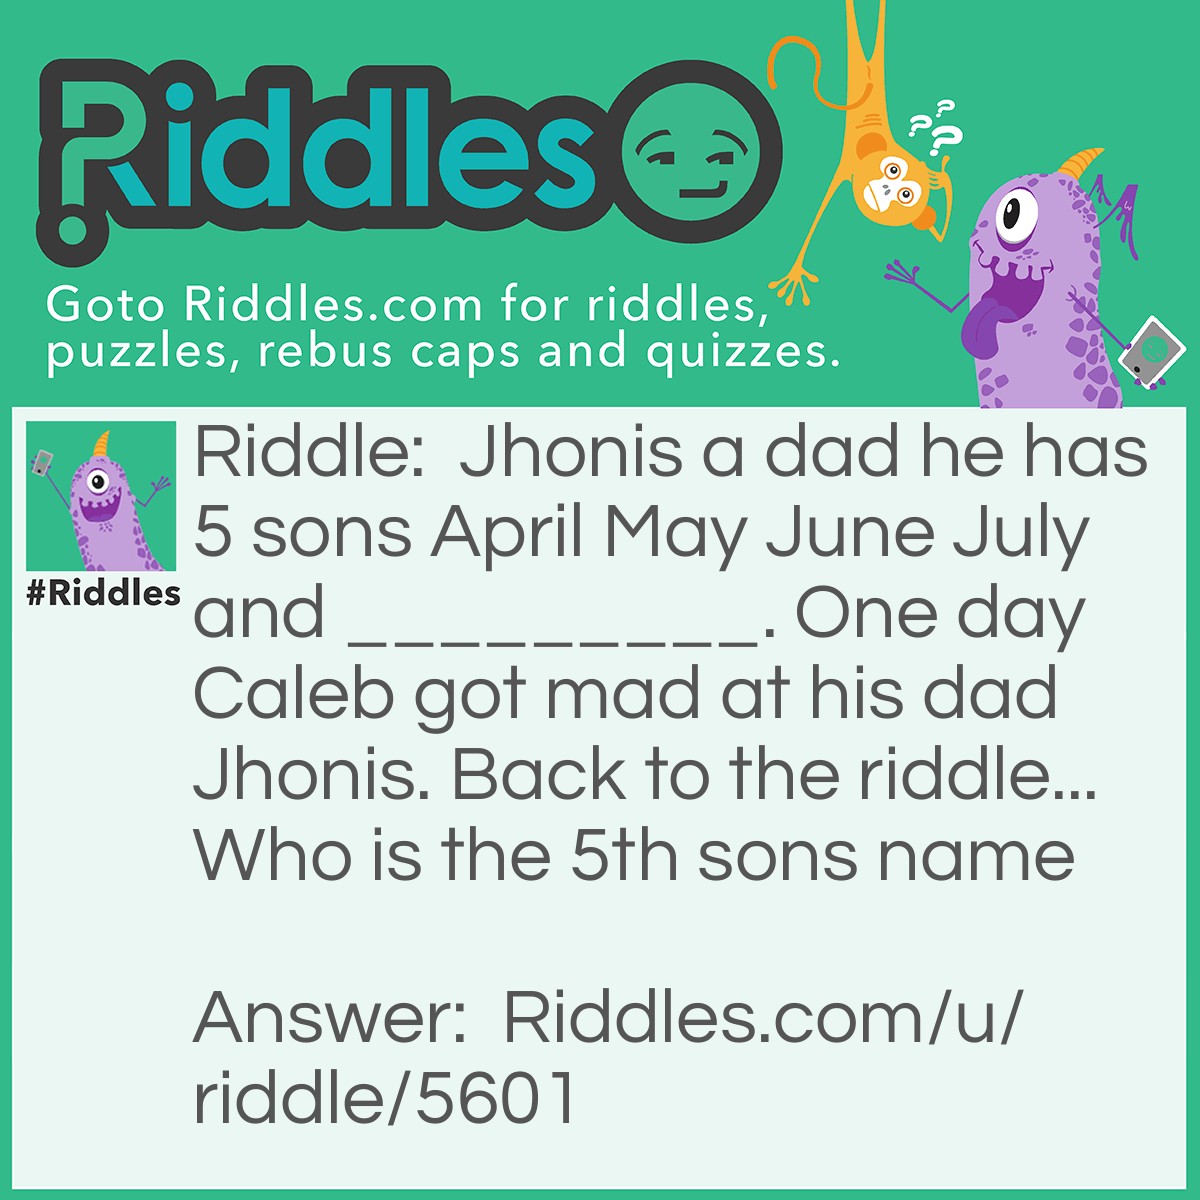 Riddle: Jhonis a dad he has 5 sons April May June July and _________. One day Caleb got mad at his dad Jhonis. Back to the riddle... Who is the 5th sons name Answer: The 5th son is Caleb.